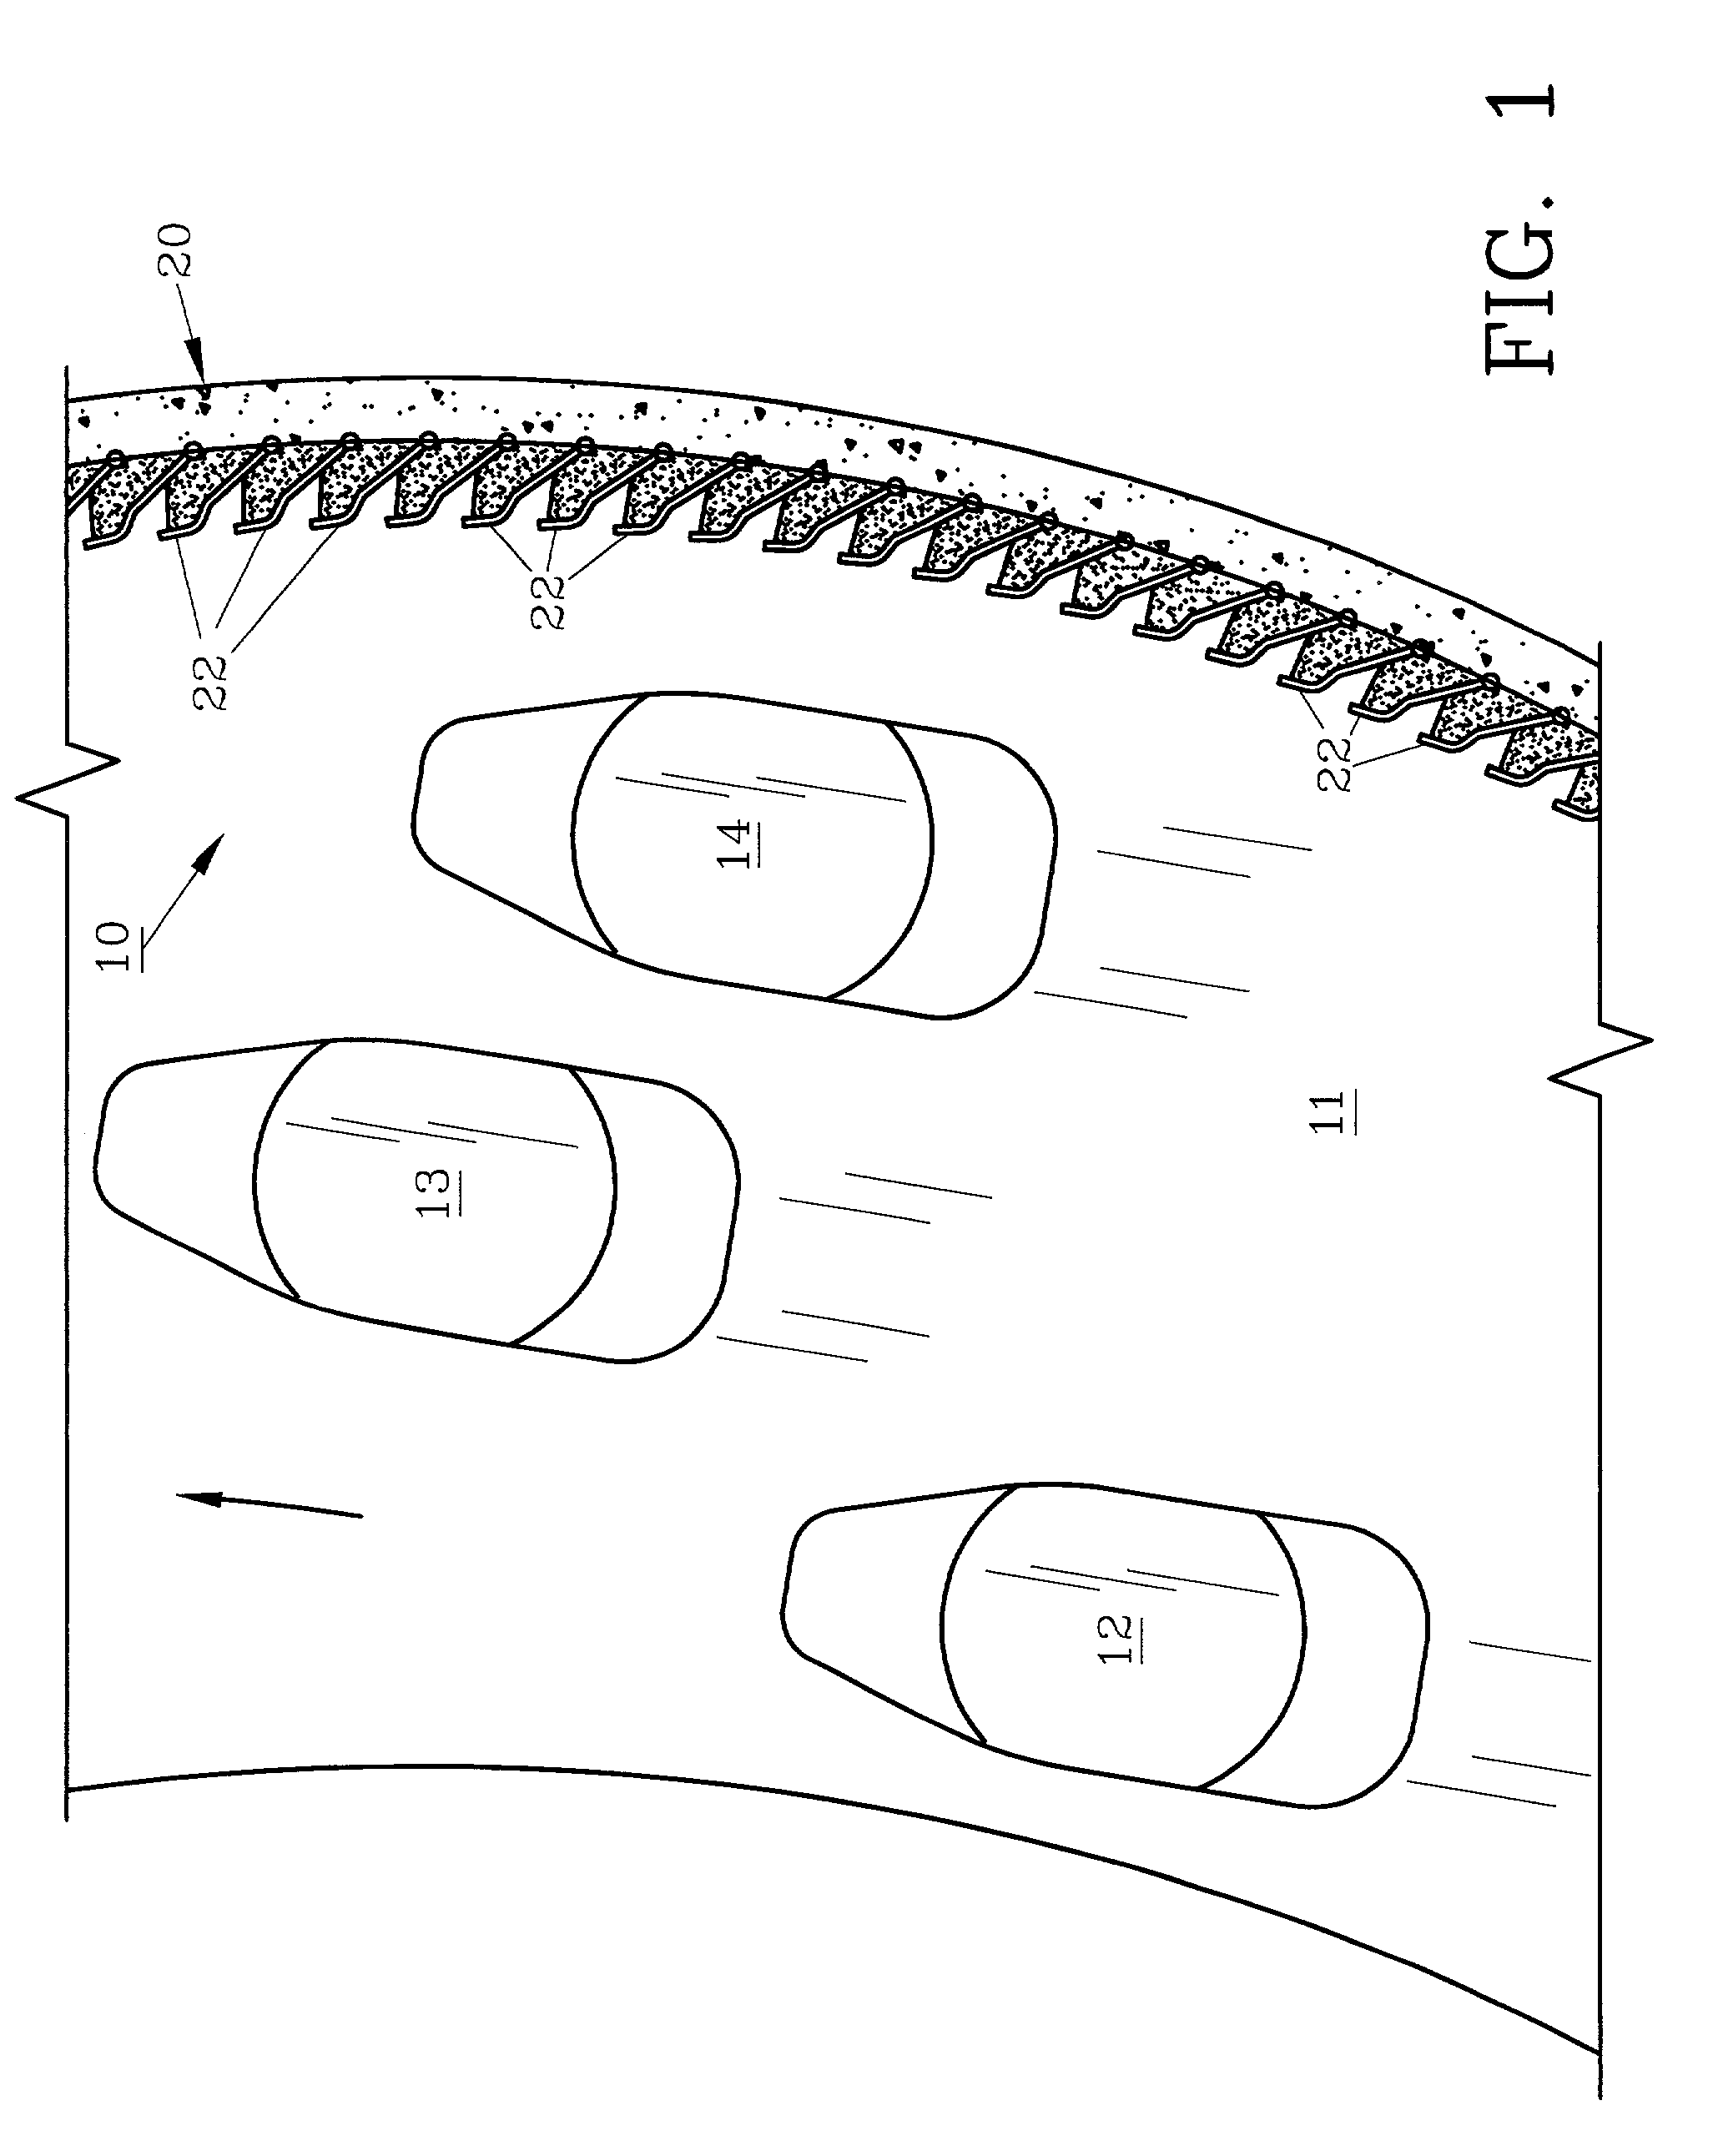 Energy absorbing system and method